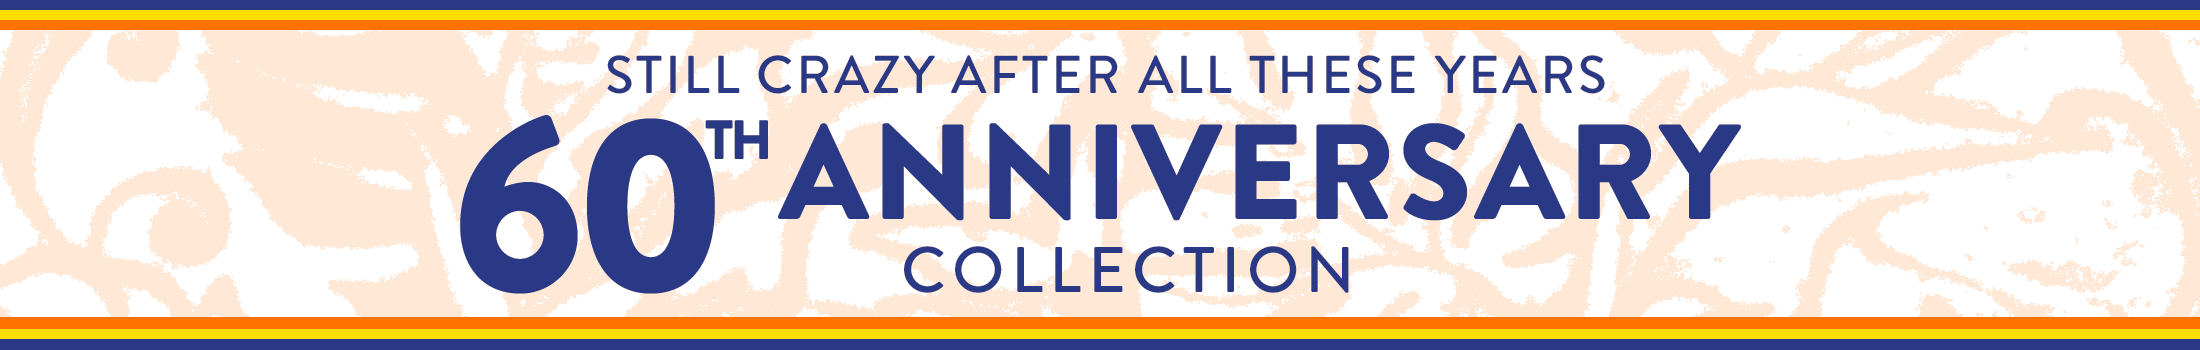 60th Anniversary Collection